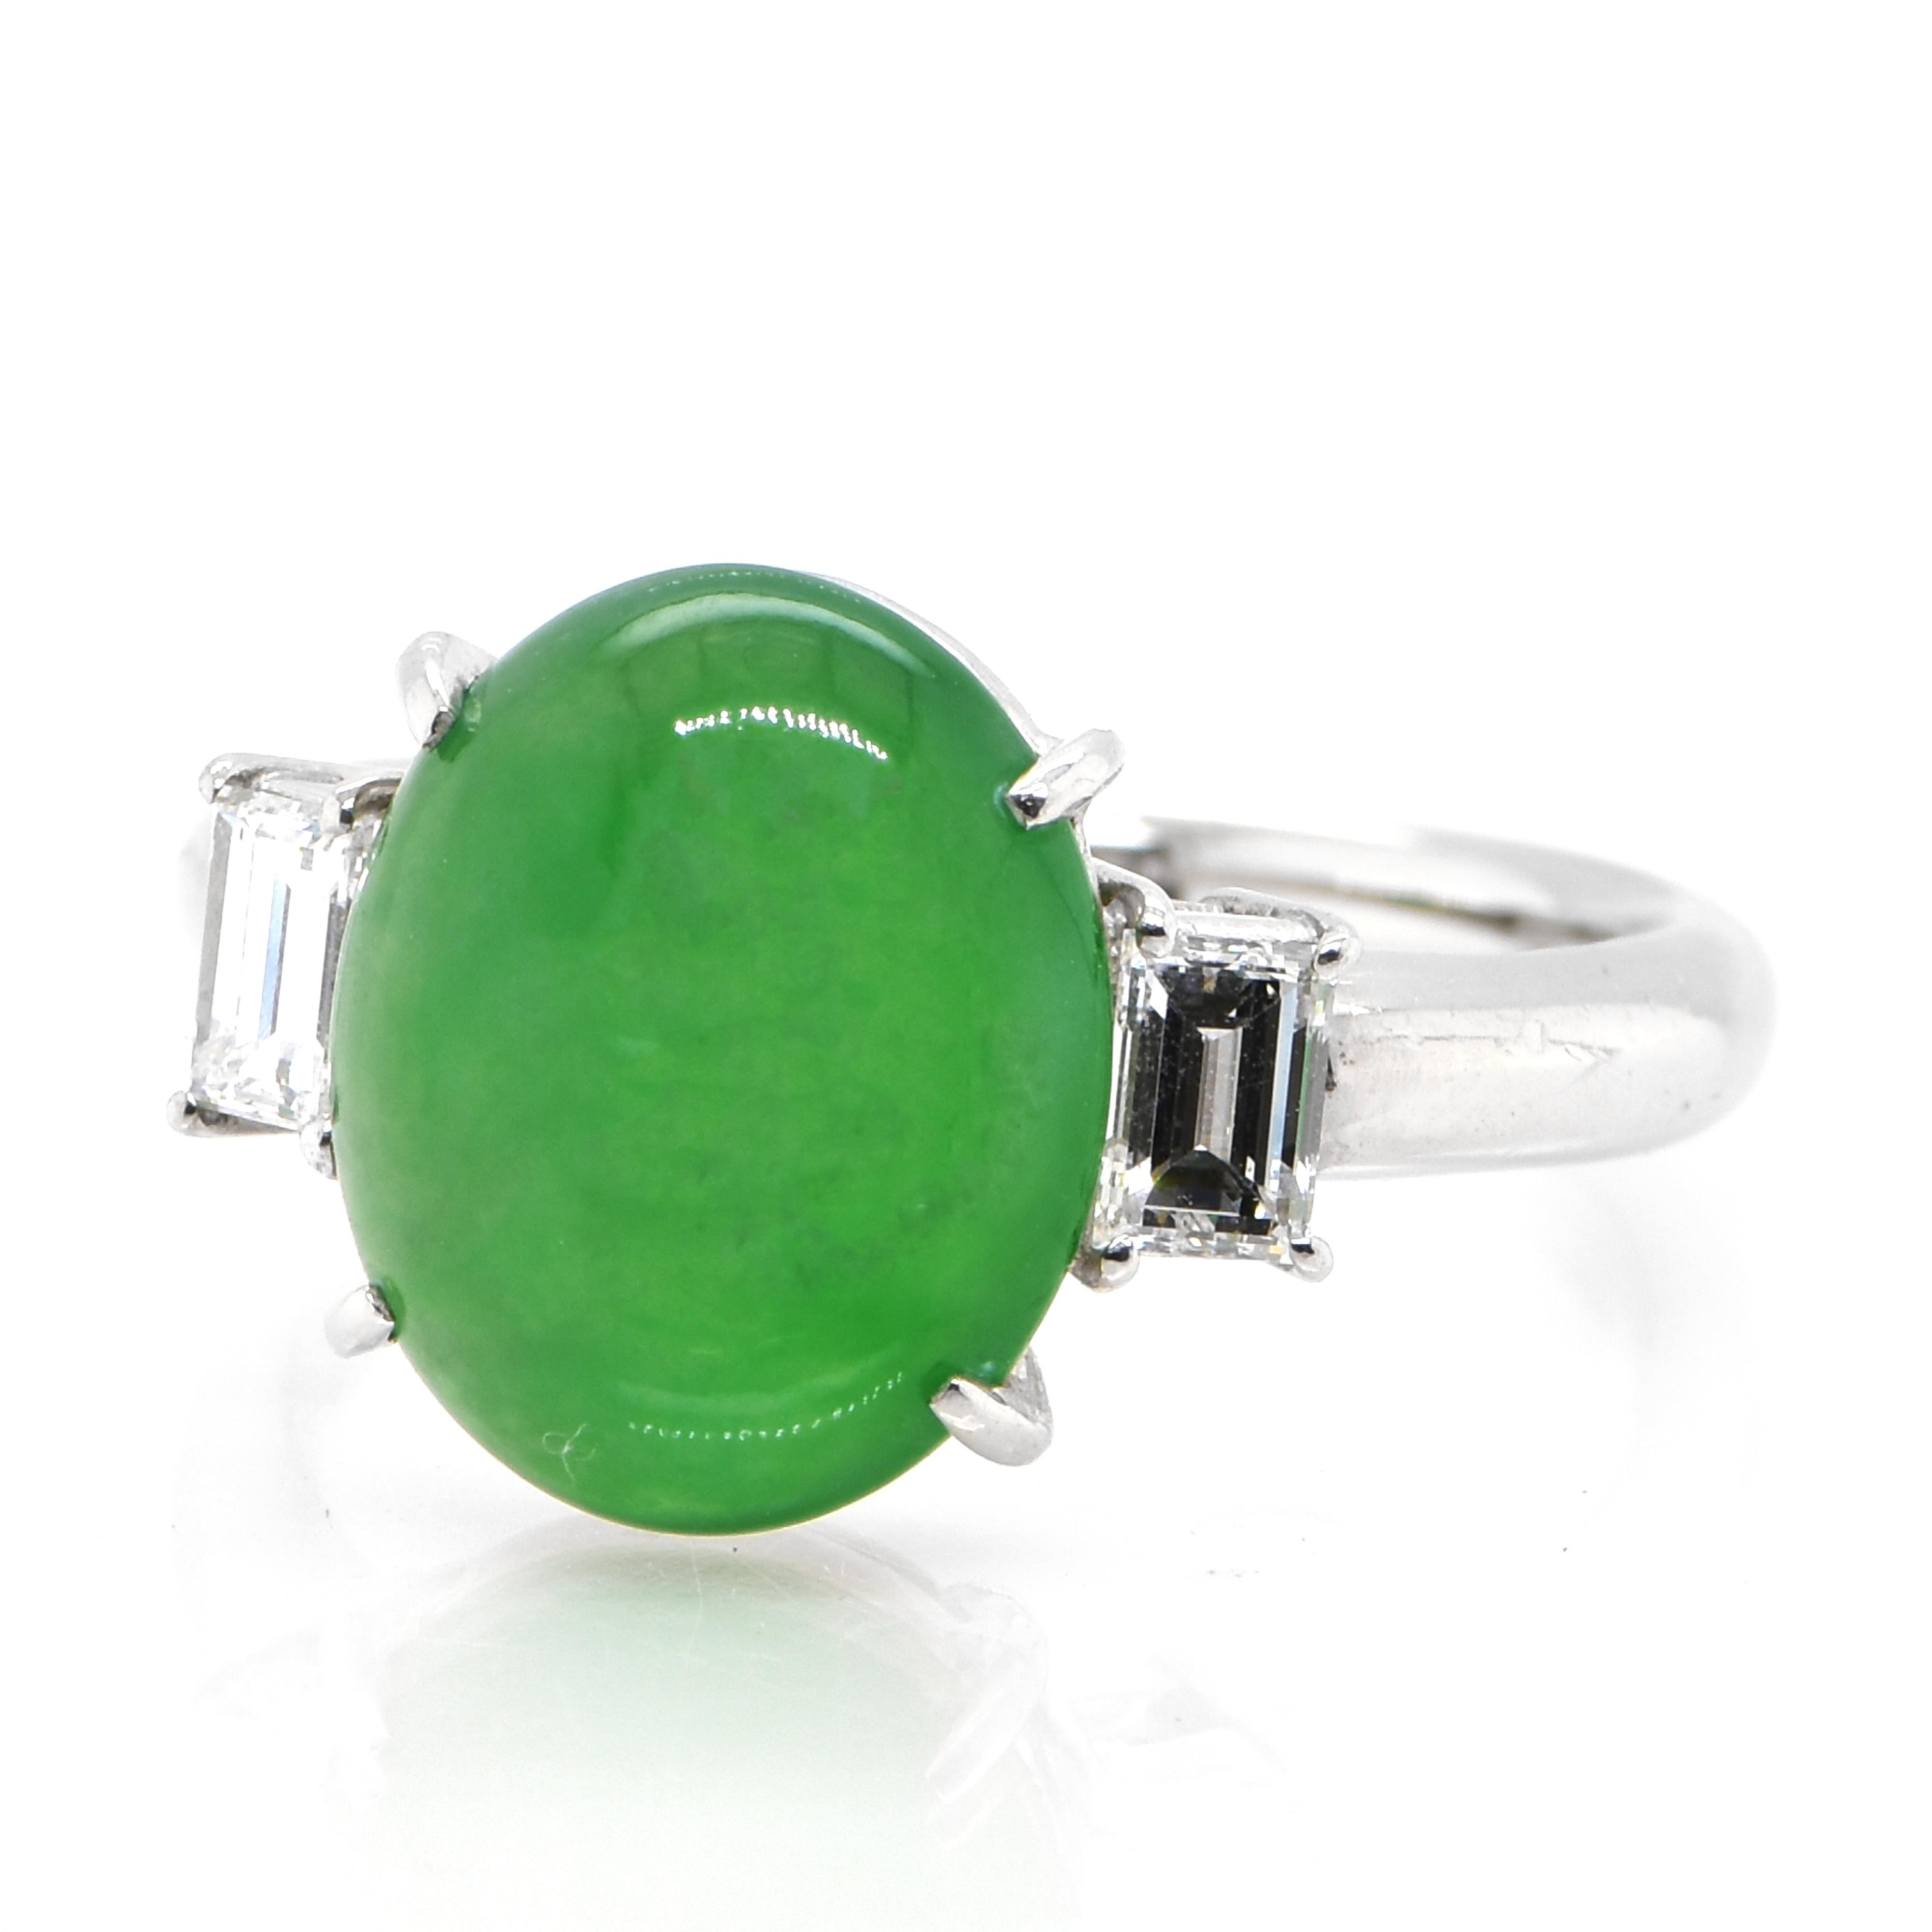 A beautiful Ring featuring a 4.153 Carat, Natural, Non-dyed Jadeite and 0.426 Carats of Diamond Accents set in Platinum. Jadeite has been cherished for millennia. Its nature is pure and enduring, yet sensuous and luxurious. Jadeite’s exceptional